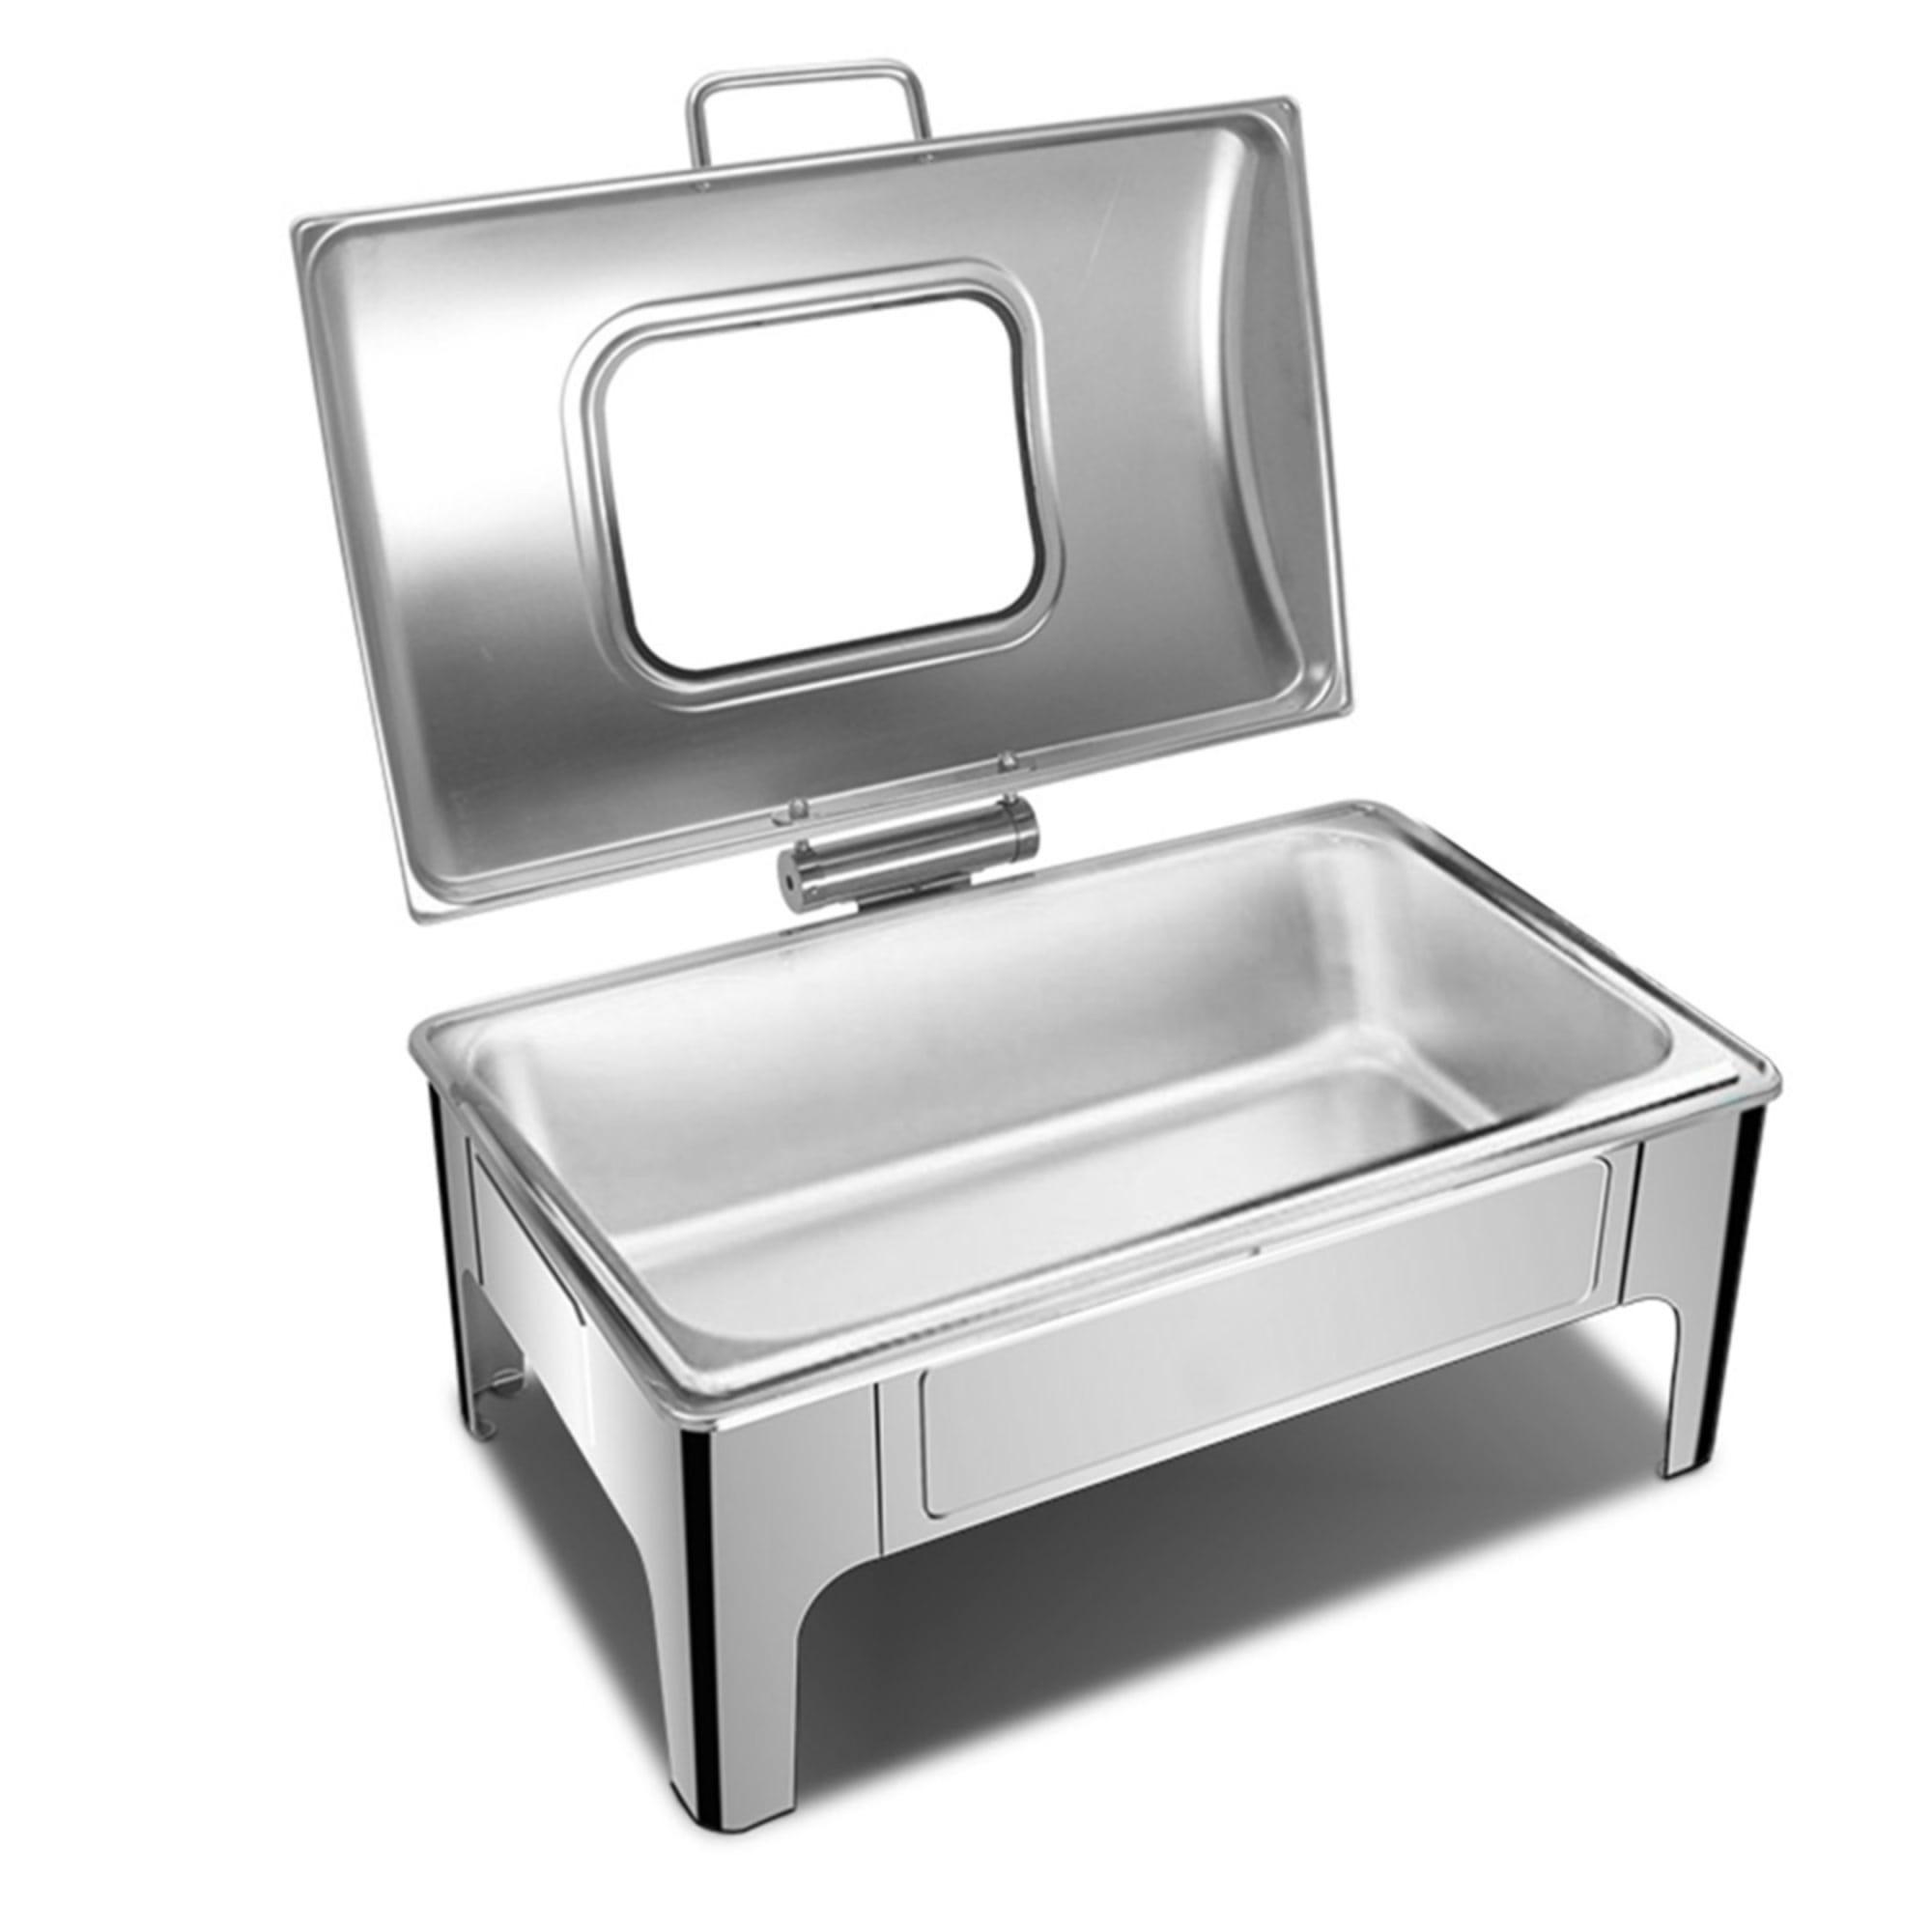 Soga Rectangular Stainless Steel Chafing Dish with Window Lid Image 3